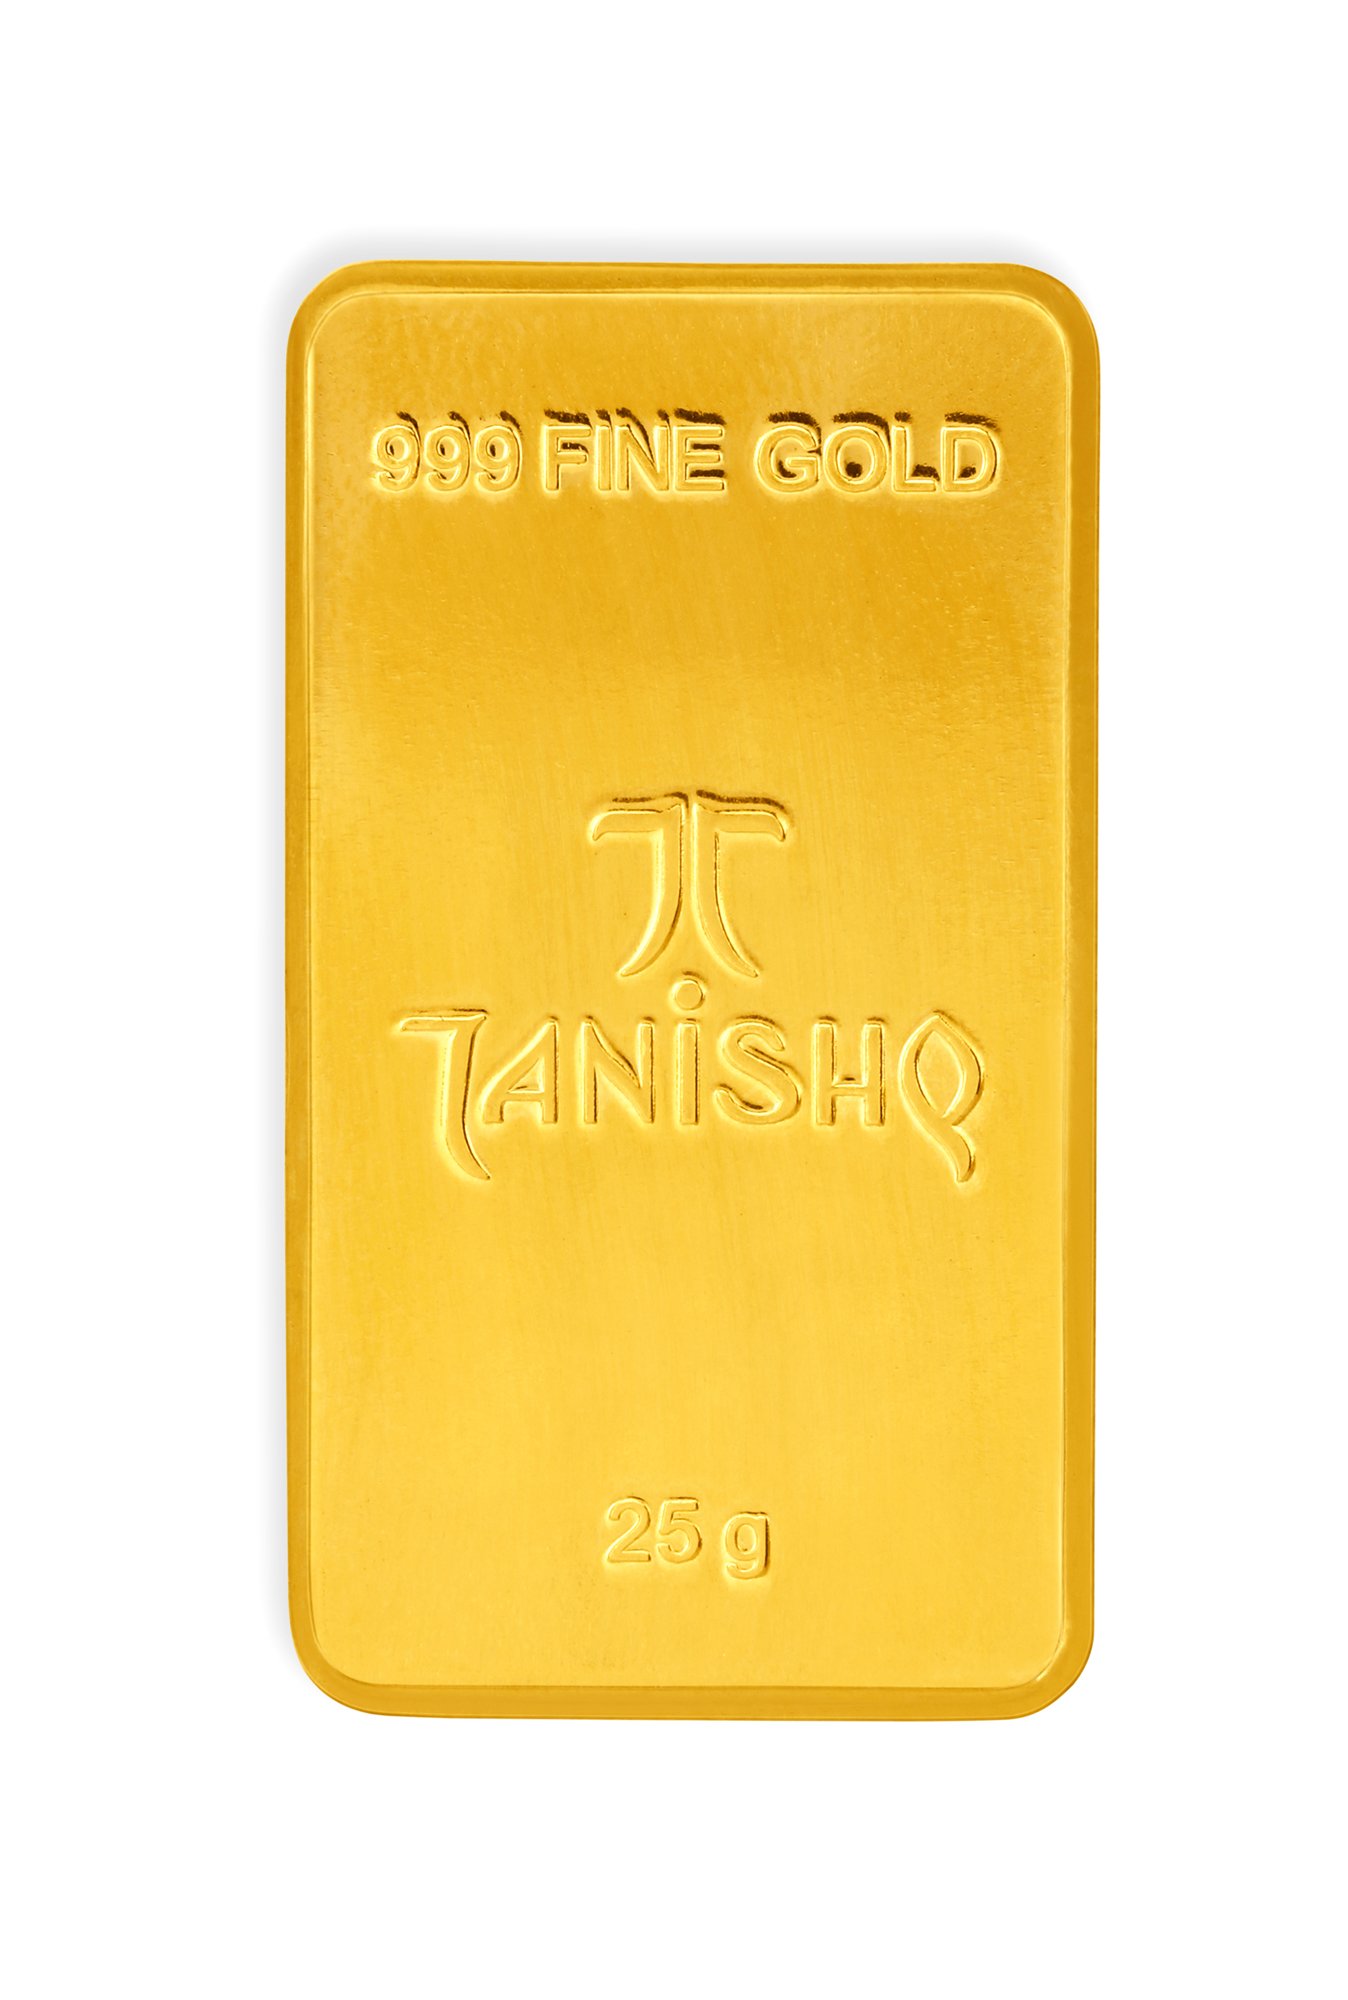 Buy Tanishq Radial 24 kt Gold Biscuit 